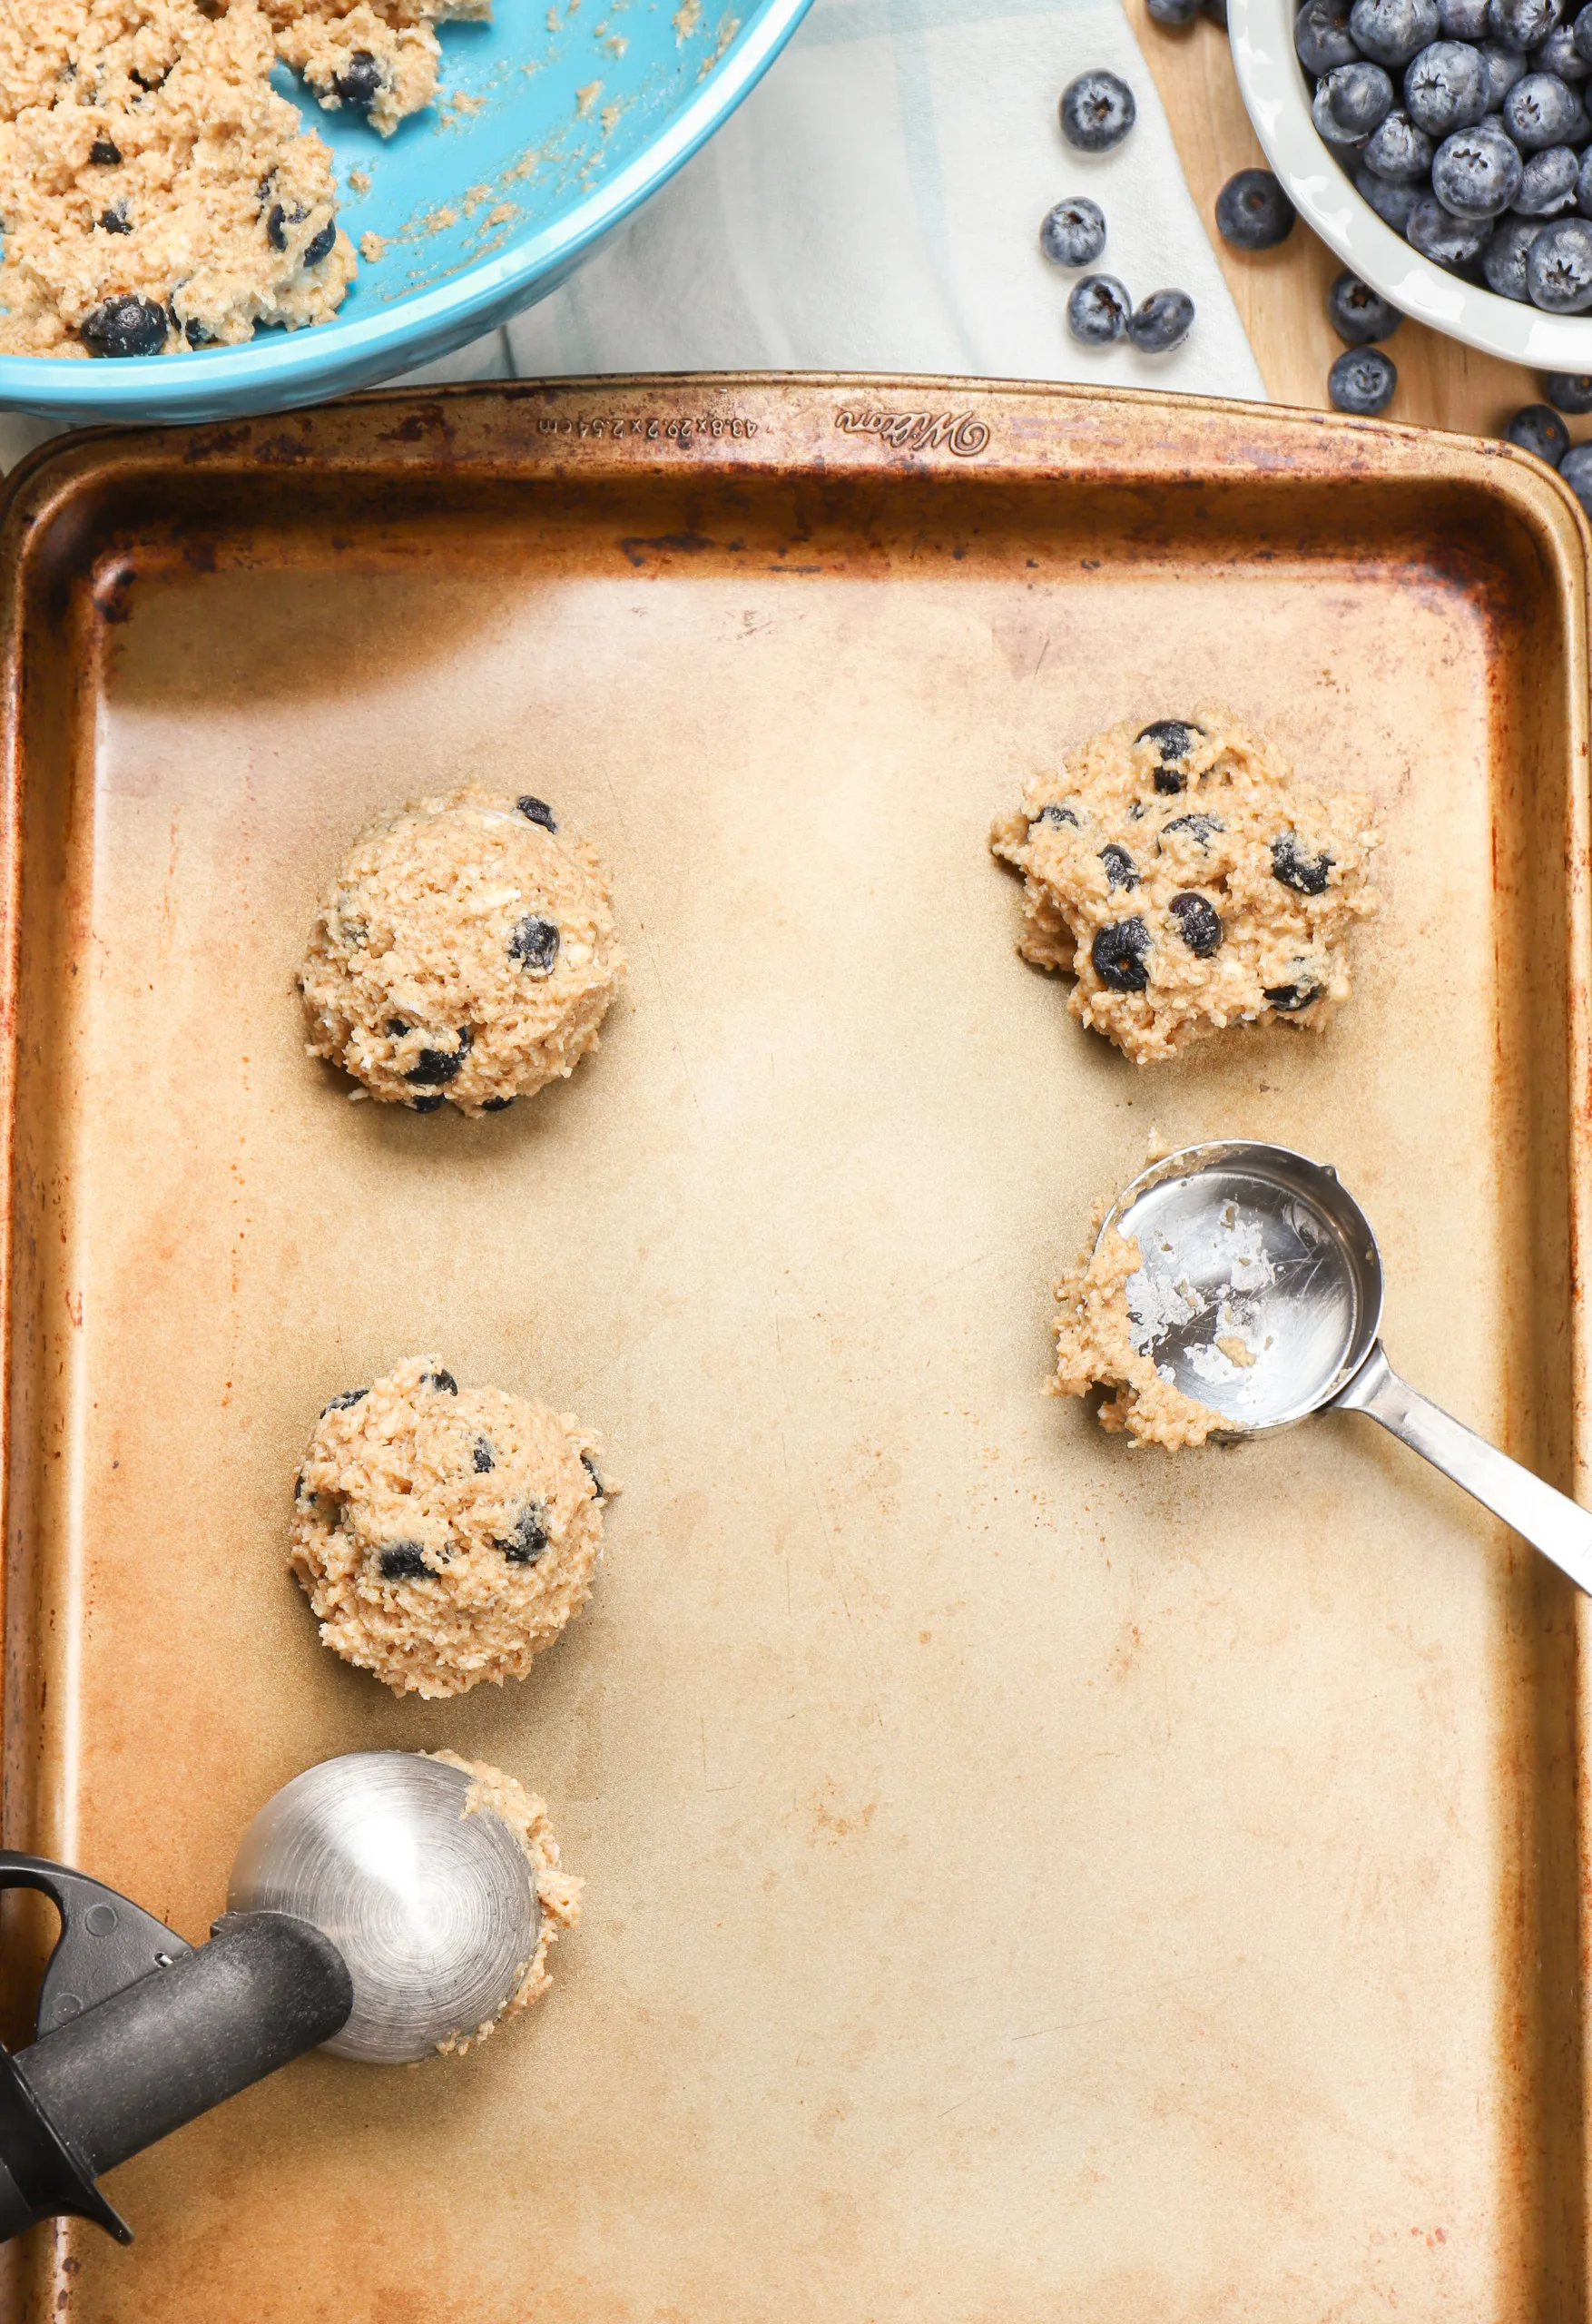 Overhead view of putting blueberry fritter dough onto an aluminum baking sheet using an ice cream scoop and a measuring cup.